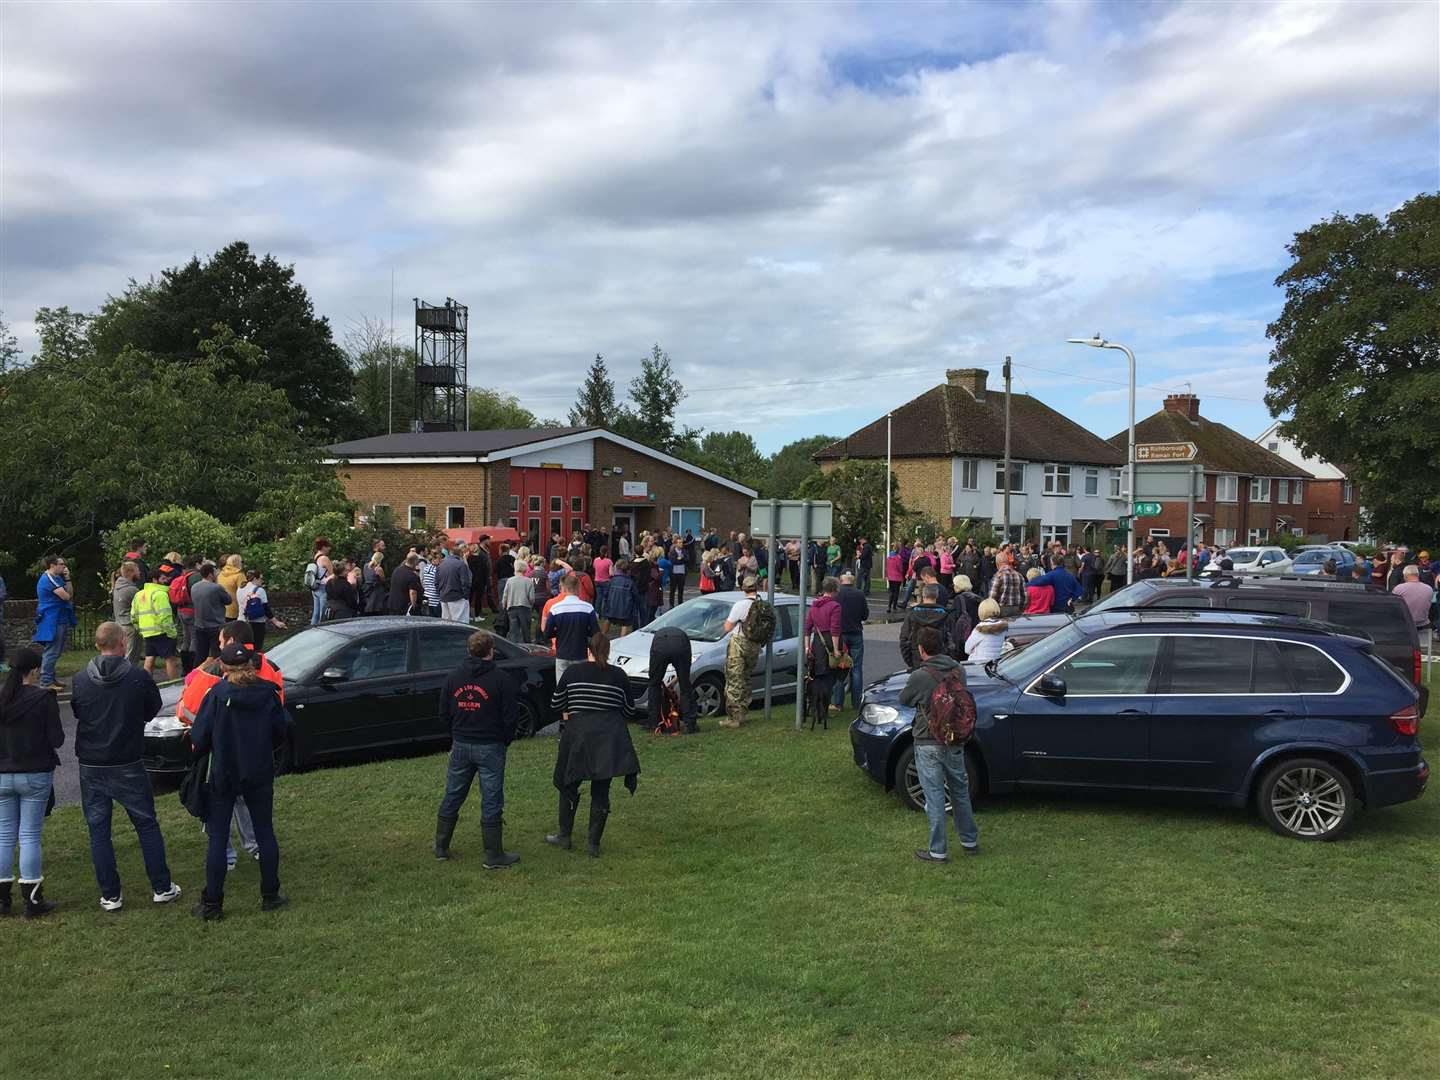 Crowds gathered outside Sandwich Fire Station for daily briefings on how they could help search